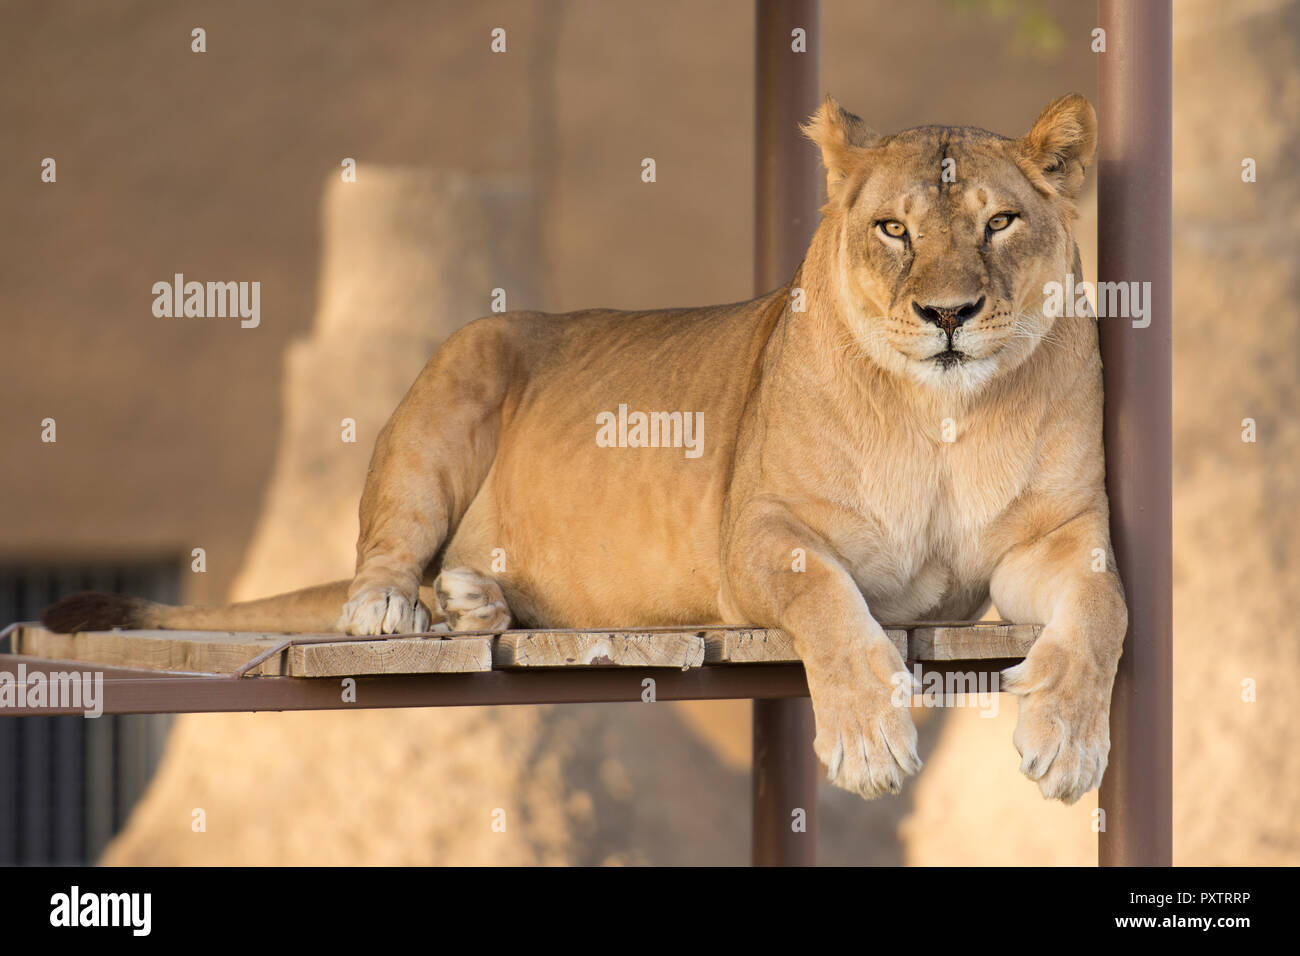 lioness sitting on a wooden and metal shelf in zoo Stock Photo